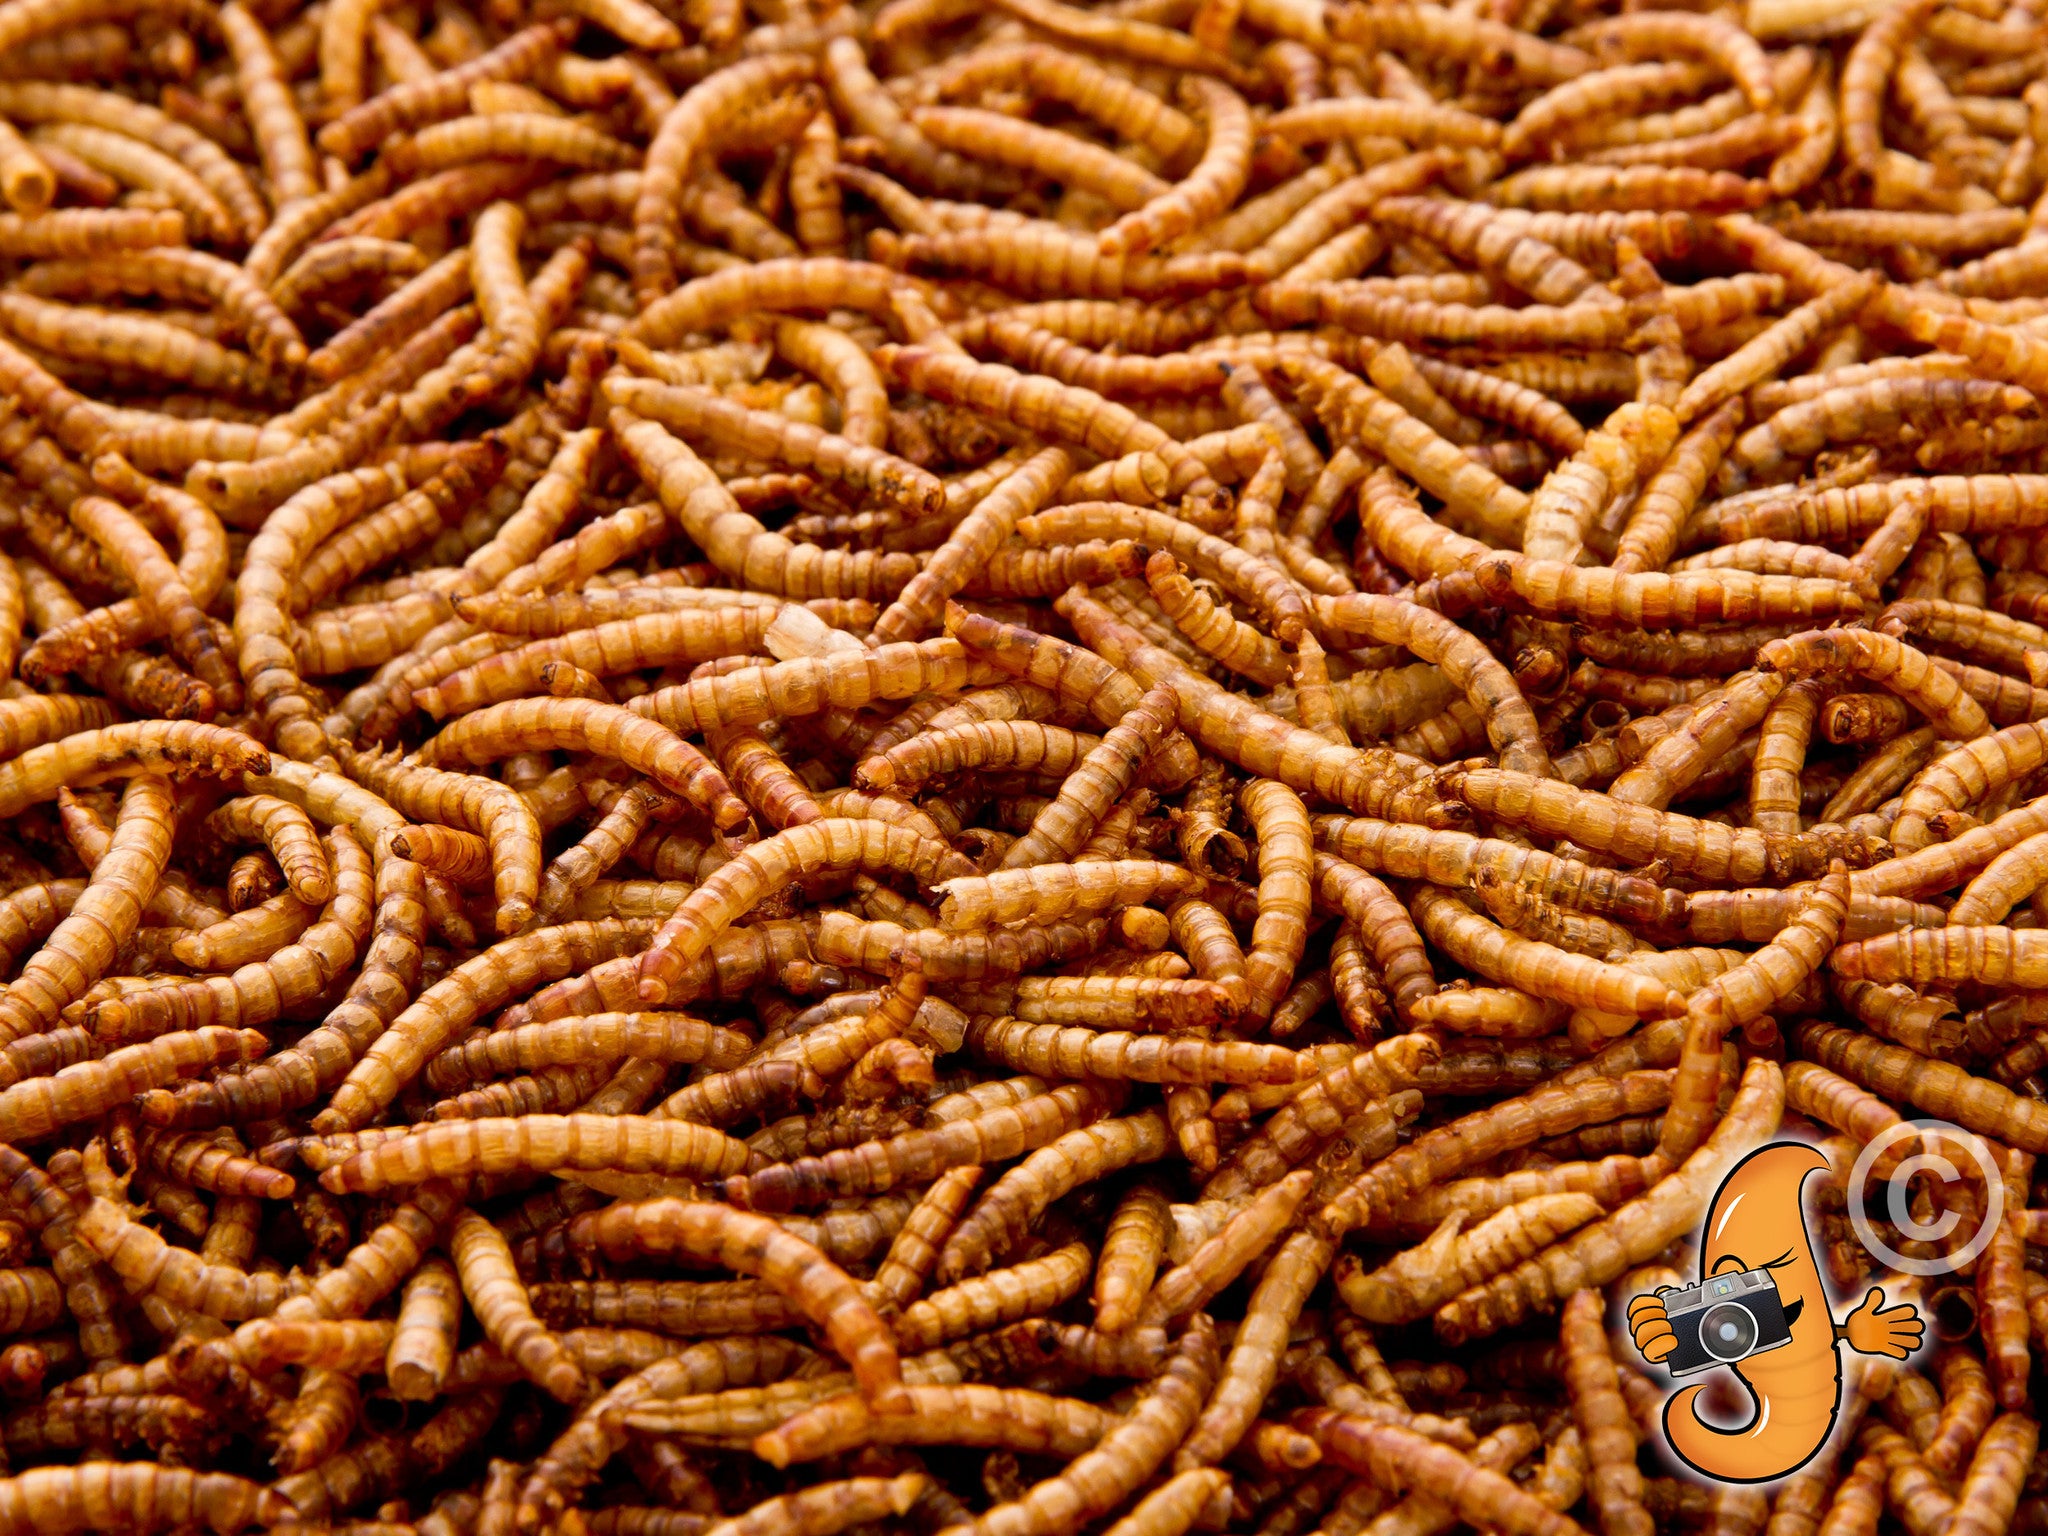 226g (8oz) Dried Chubby Mealworms -  - 7